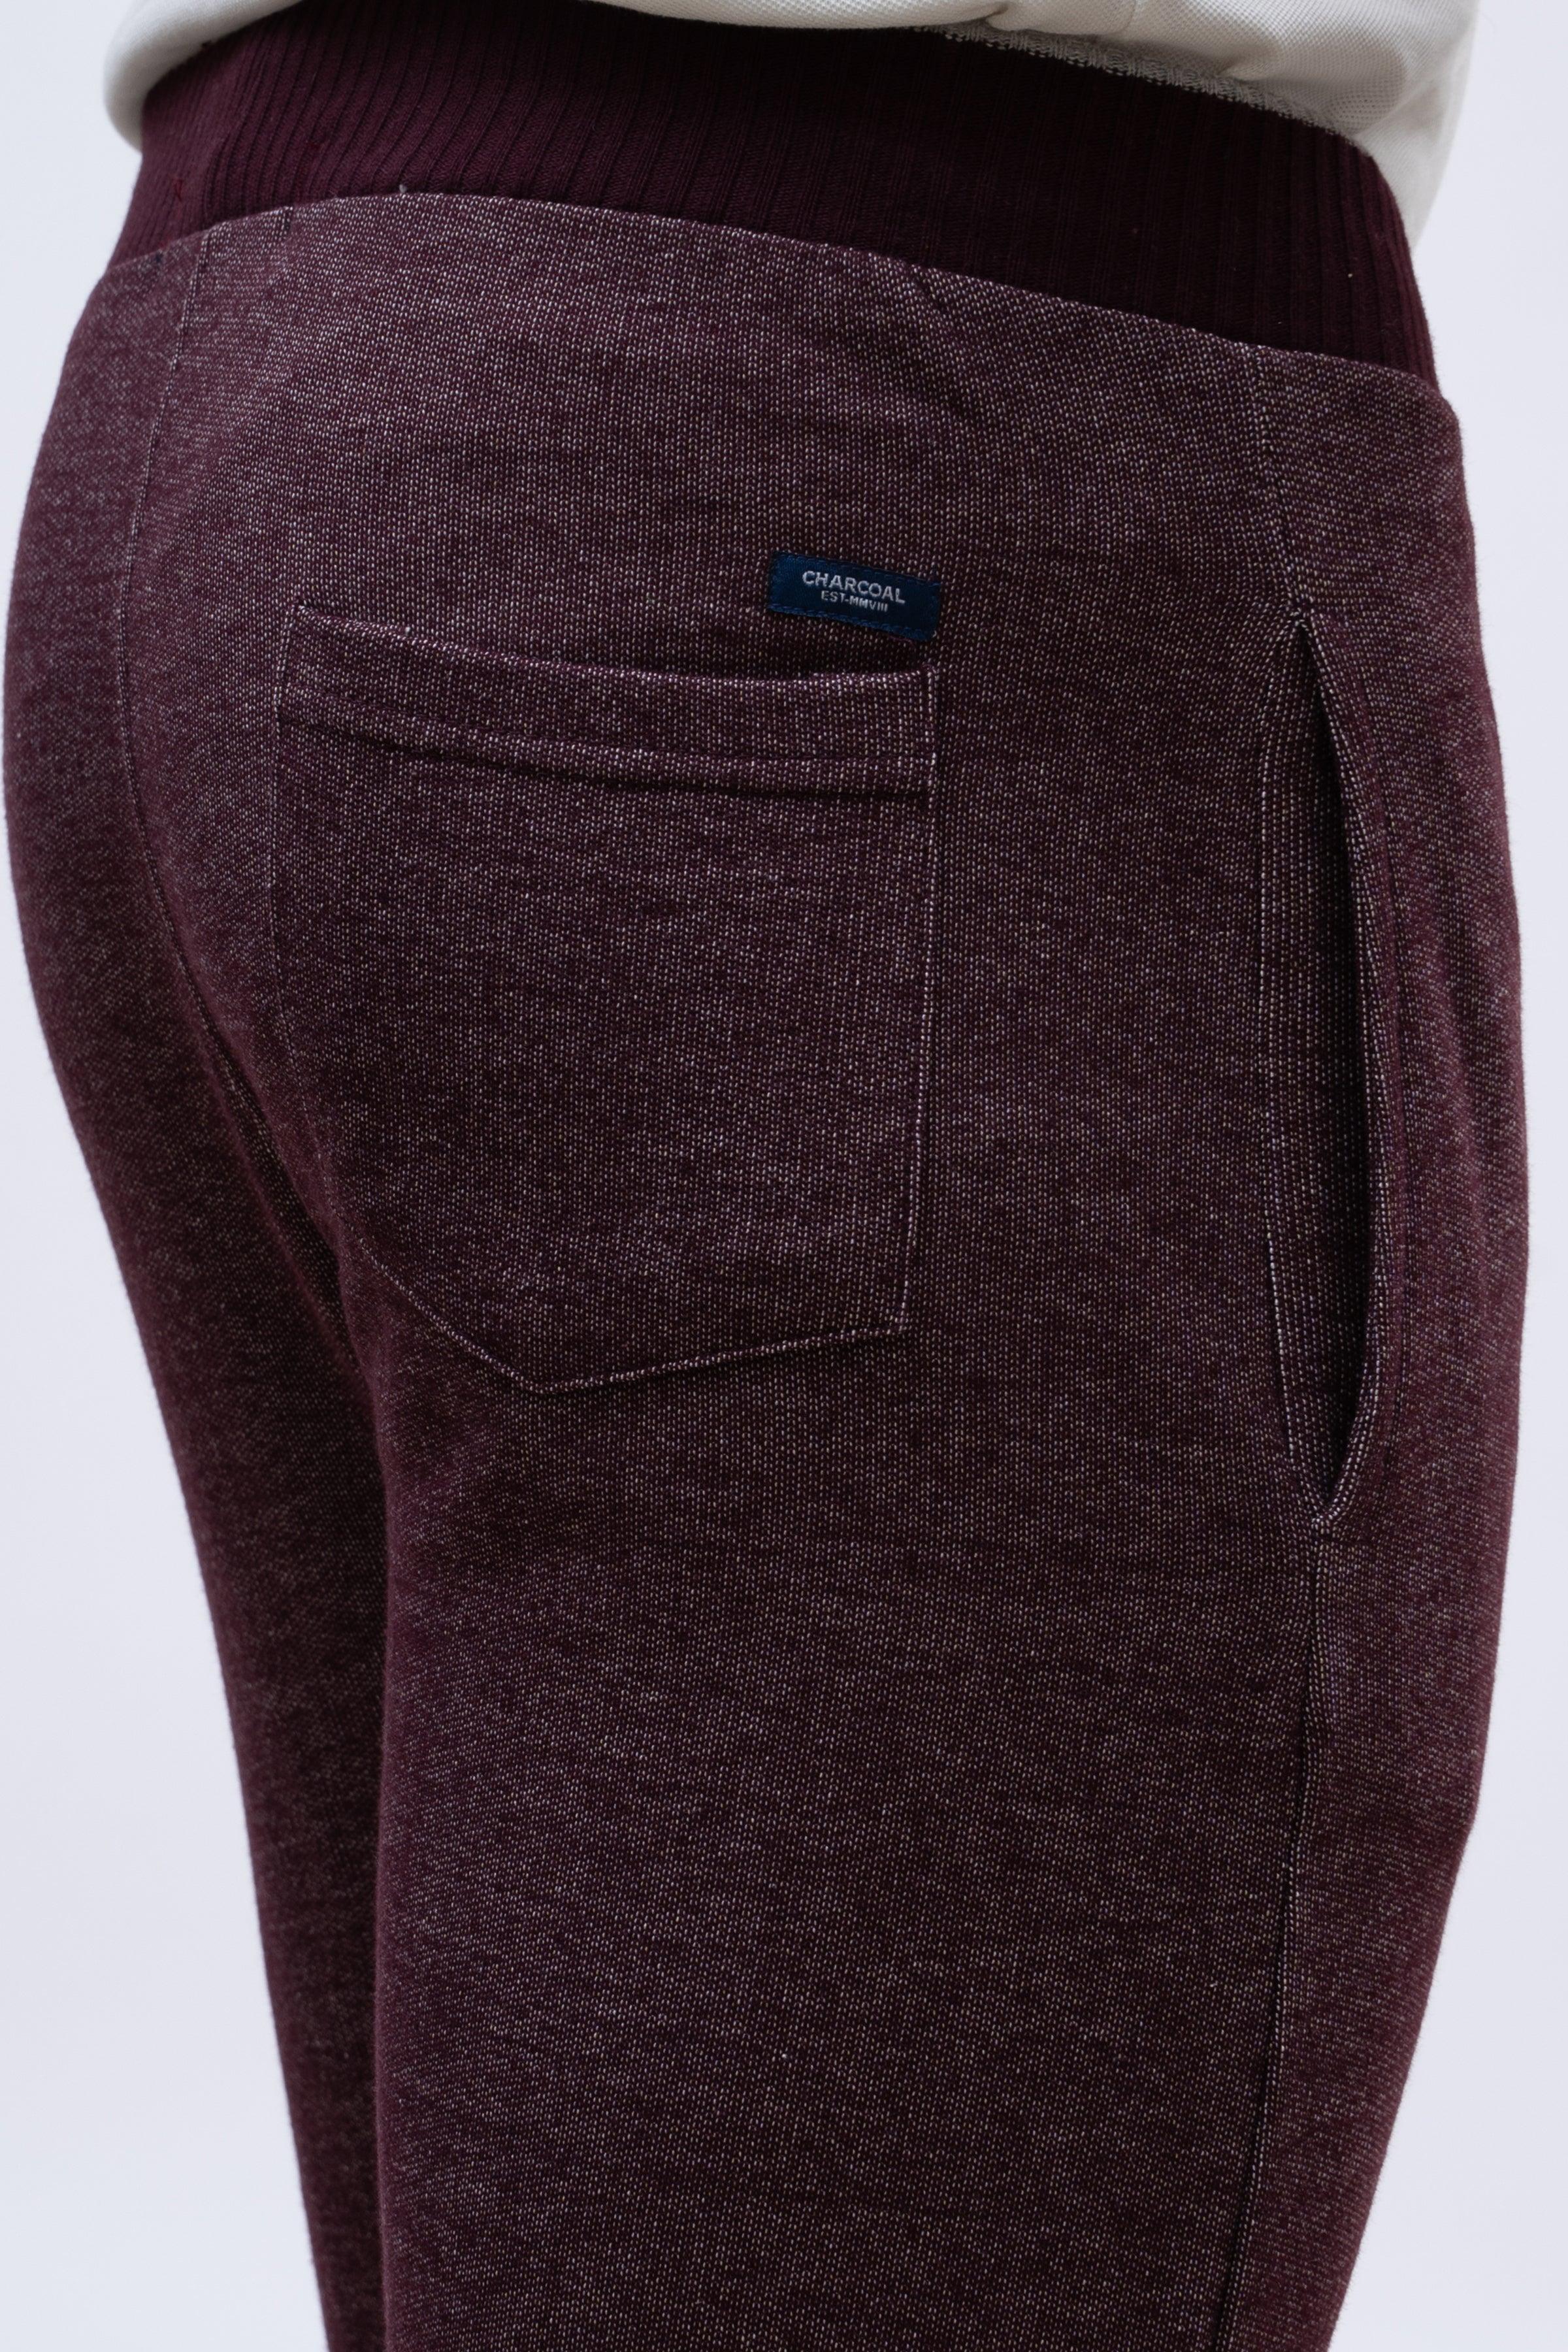 CASUAL TROUSER MAROON at Charcoal Clothing